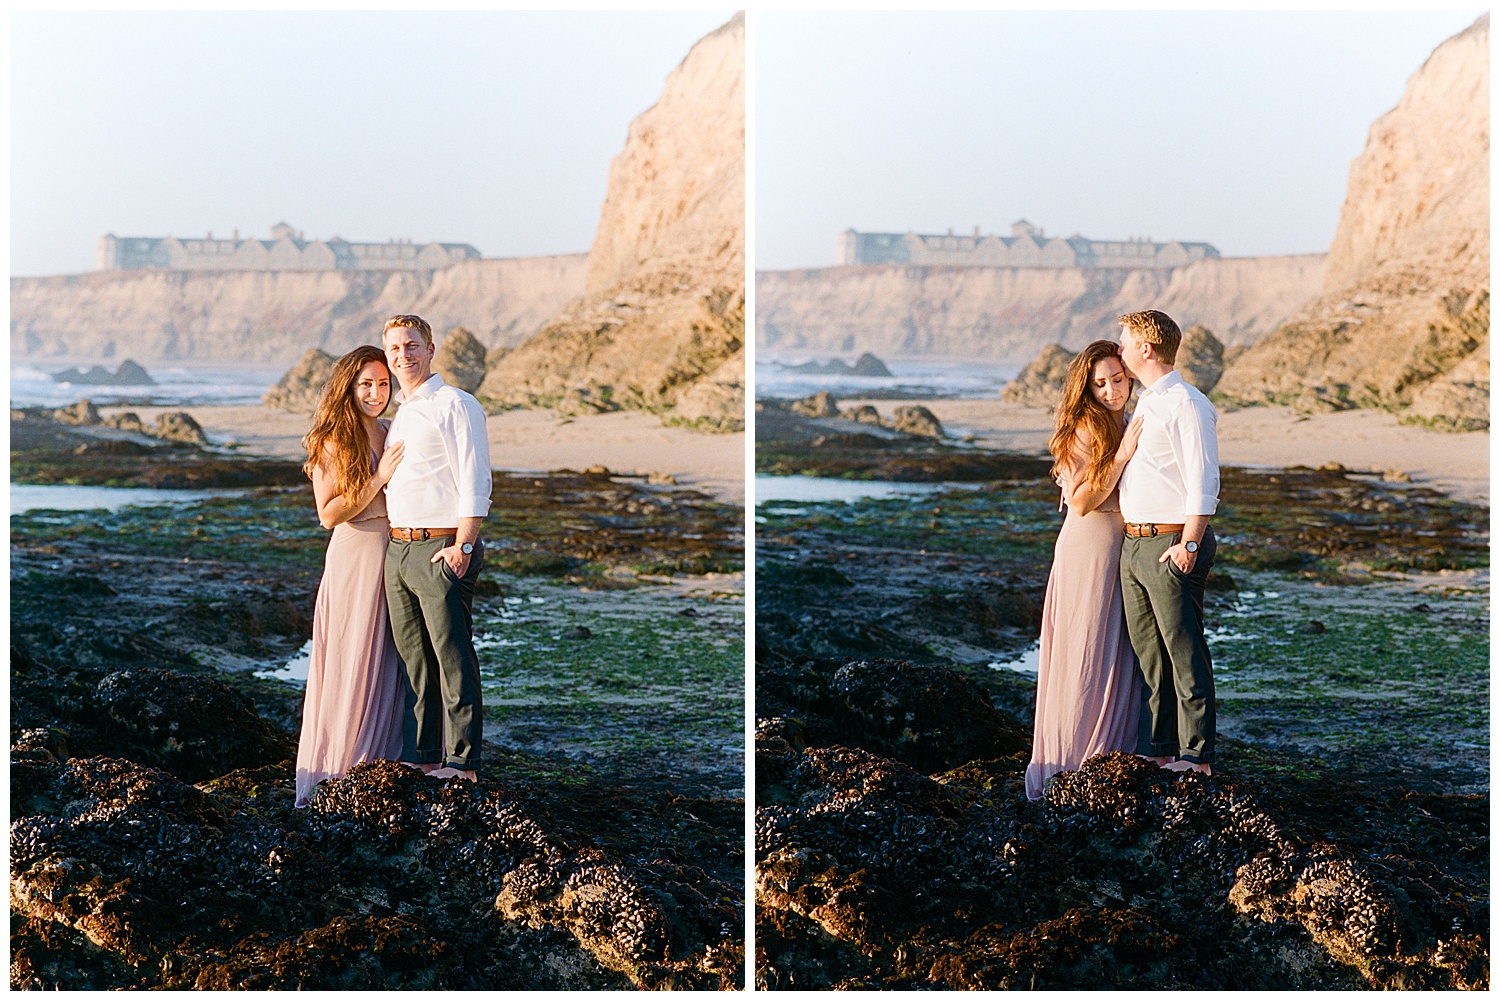 photos taken during engagement session in half moon bay
